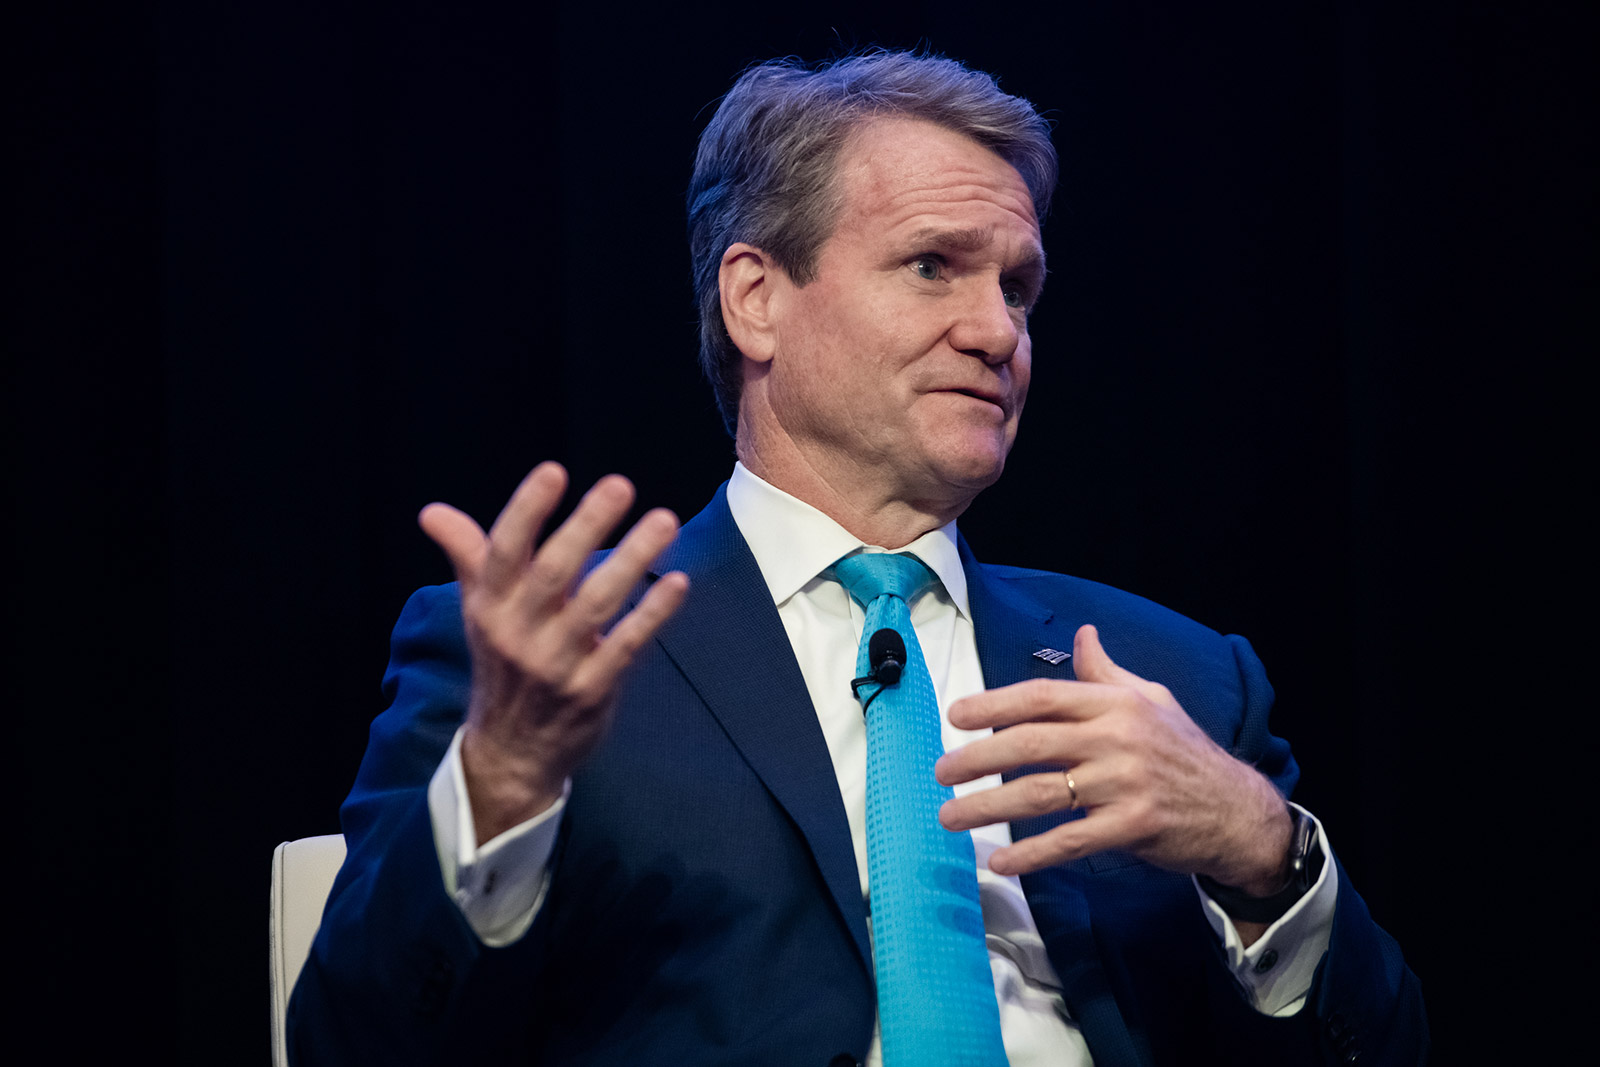 Bank of America CEO Brian Moynihan speaks during an event in New York on October 23, 2019.